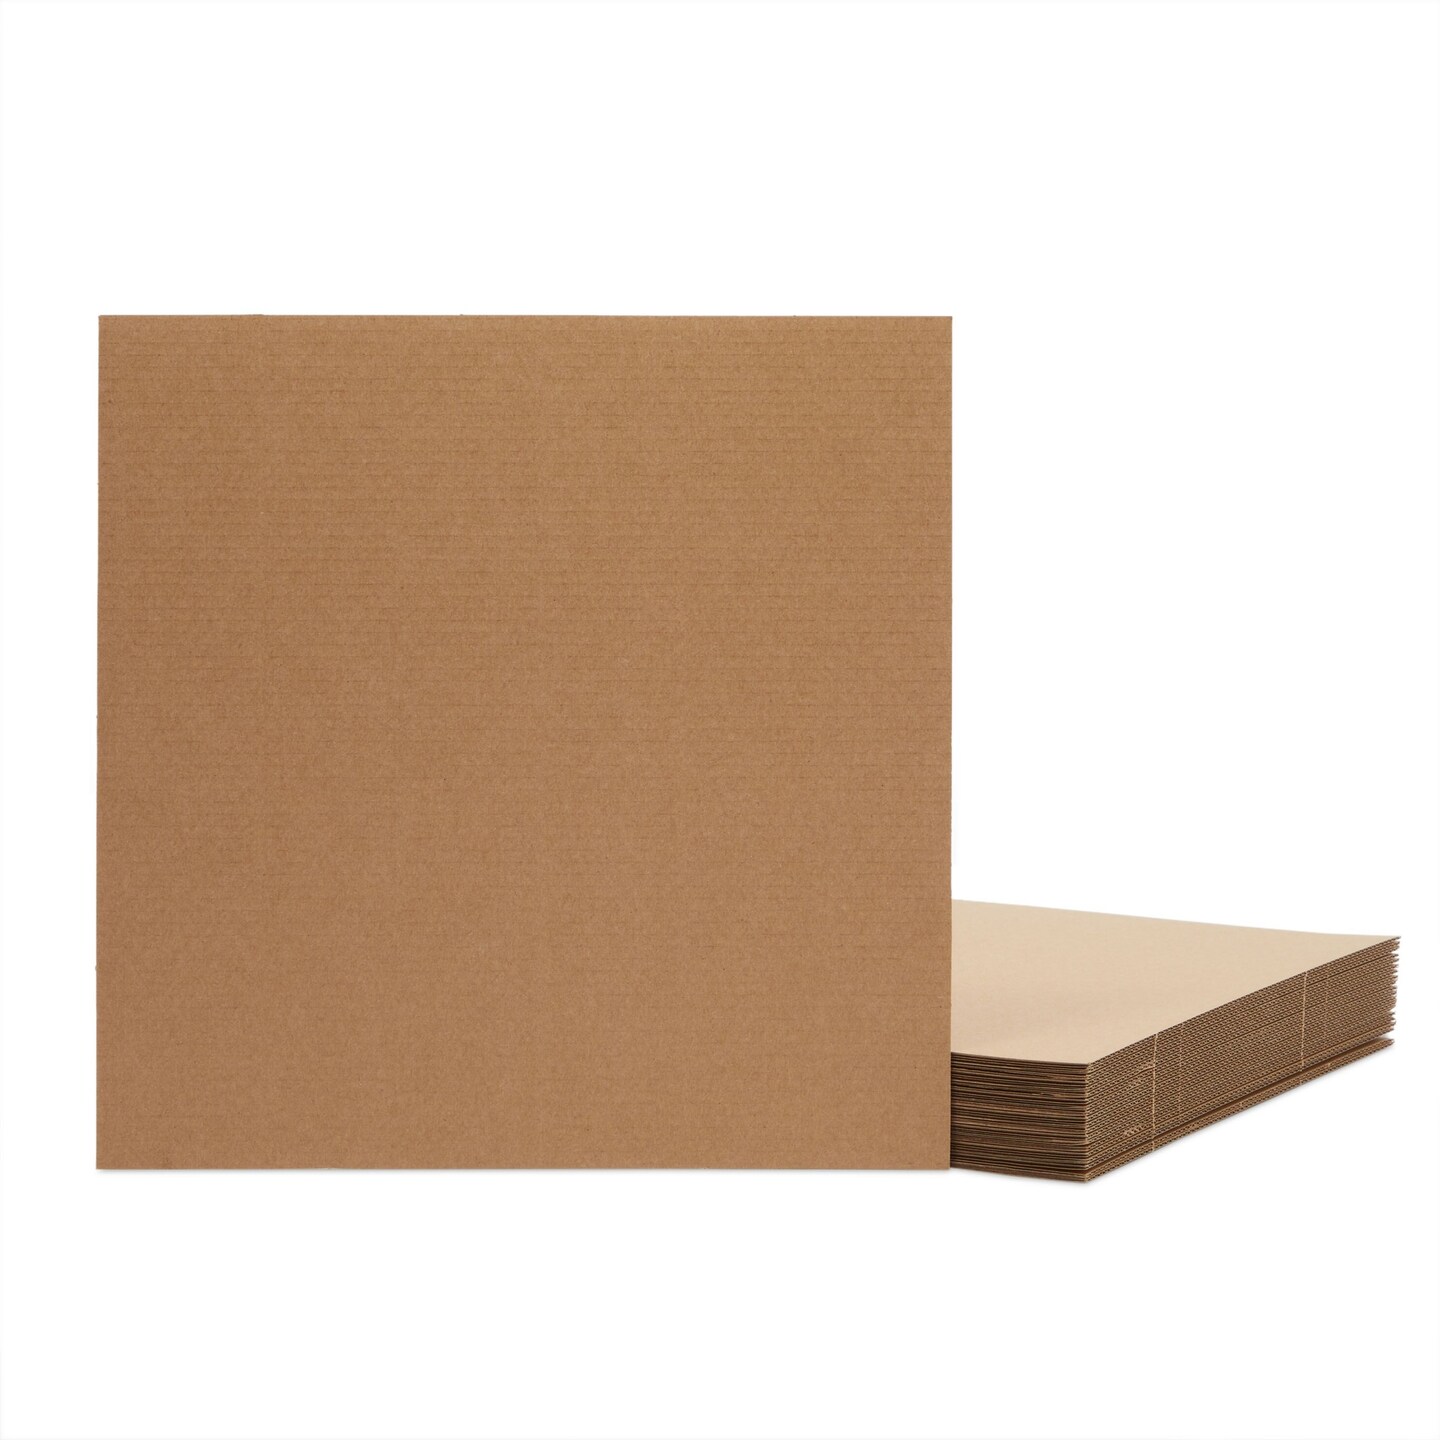 50pcs. Cardboard 12x12 Inches Corrugated Card Board Pads For Packaging  Crafts